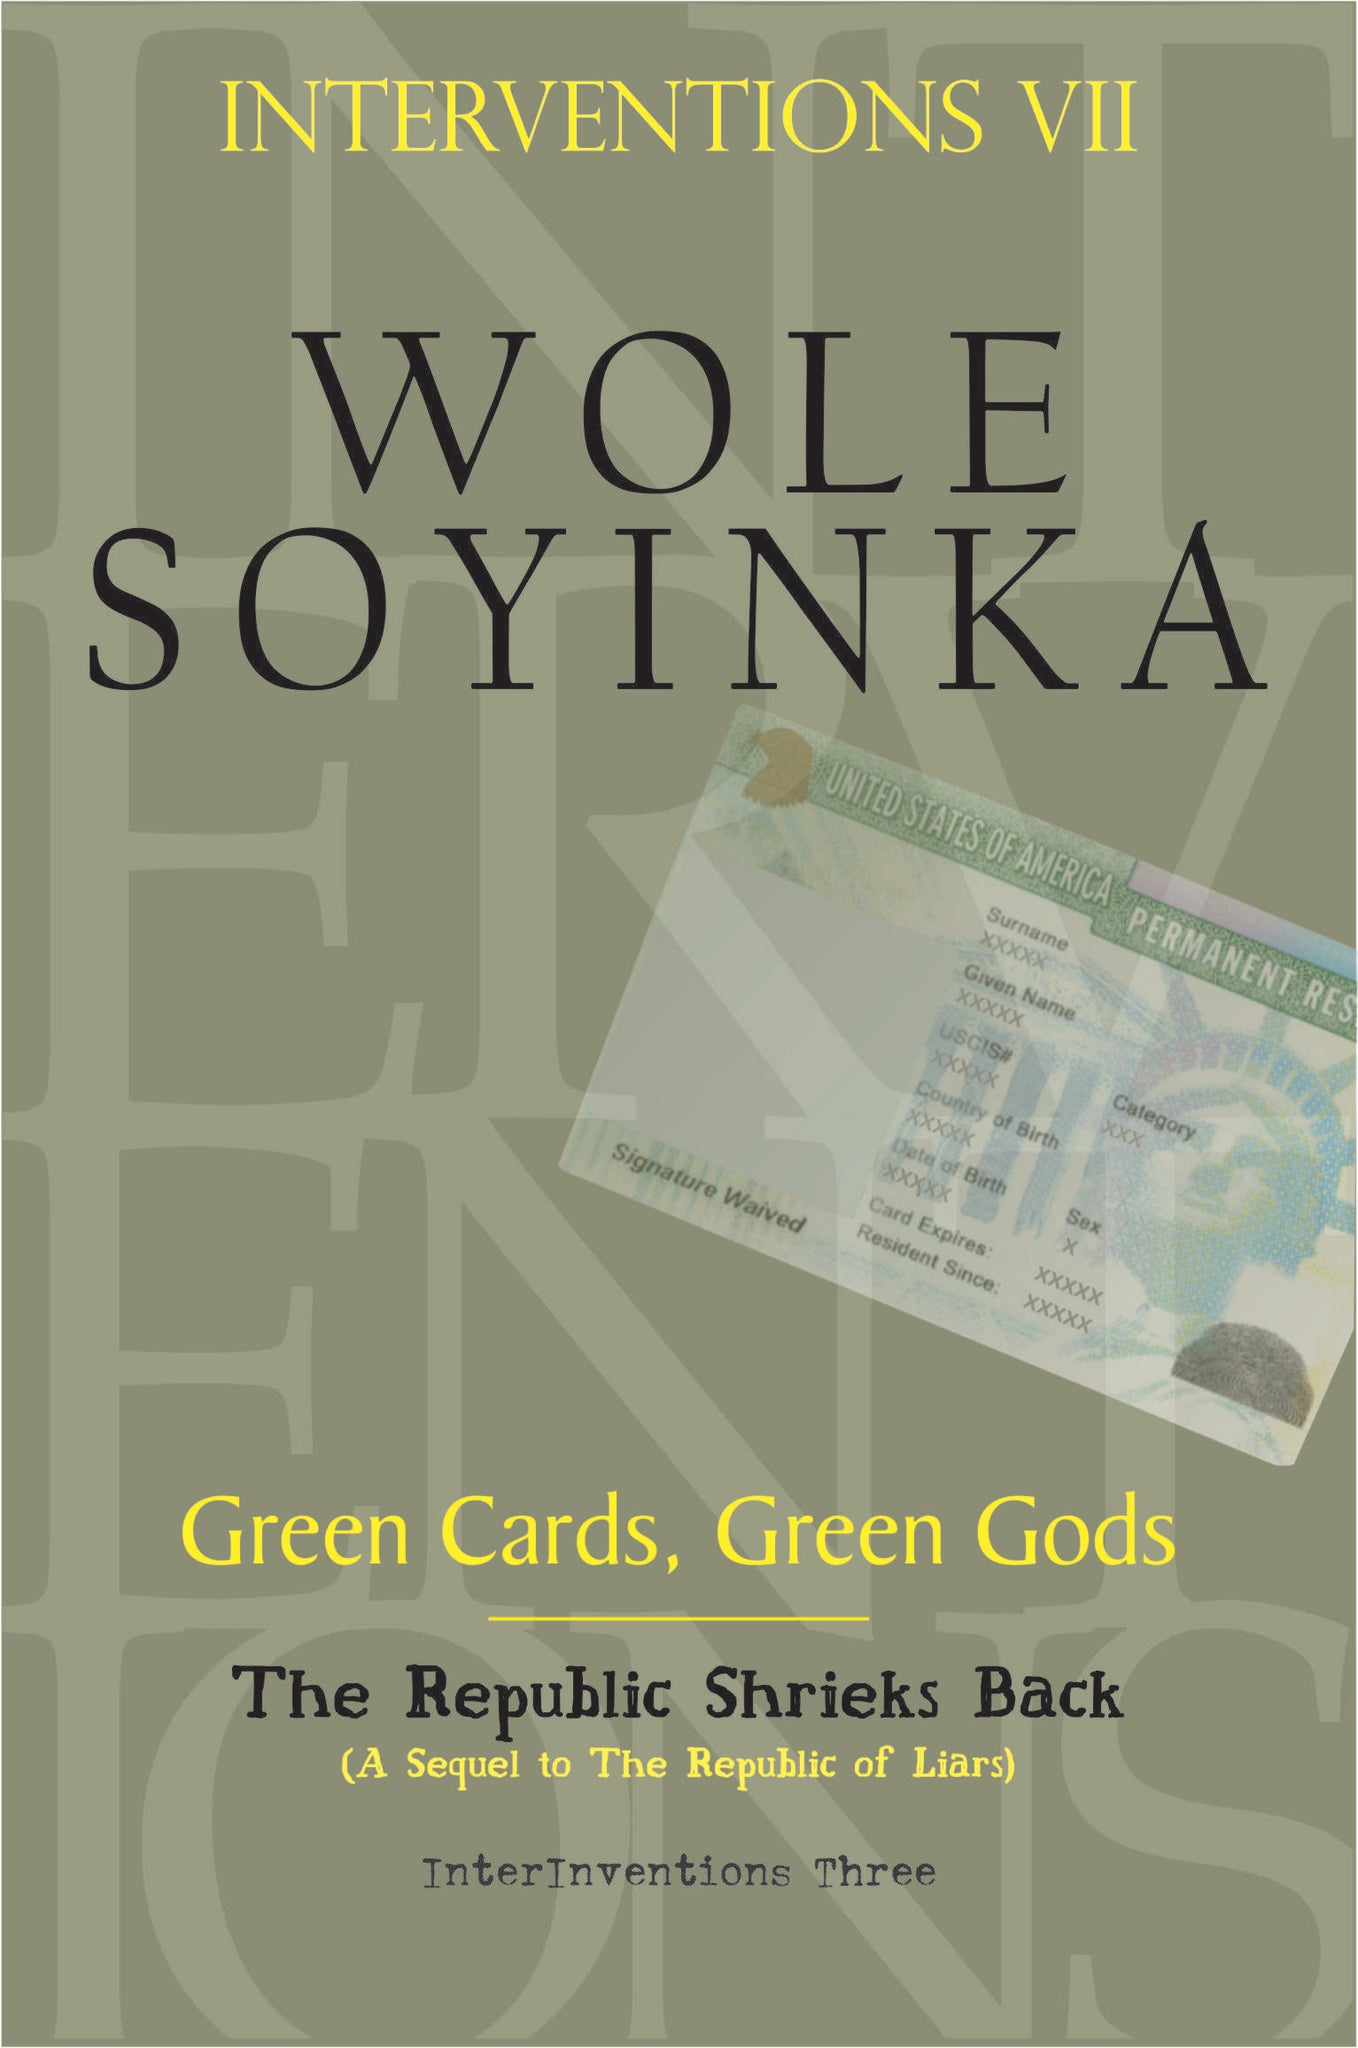 Interventions VII: Green Cards, Green Gods